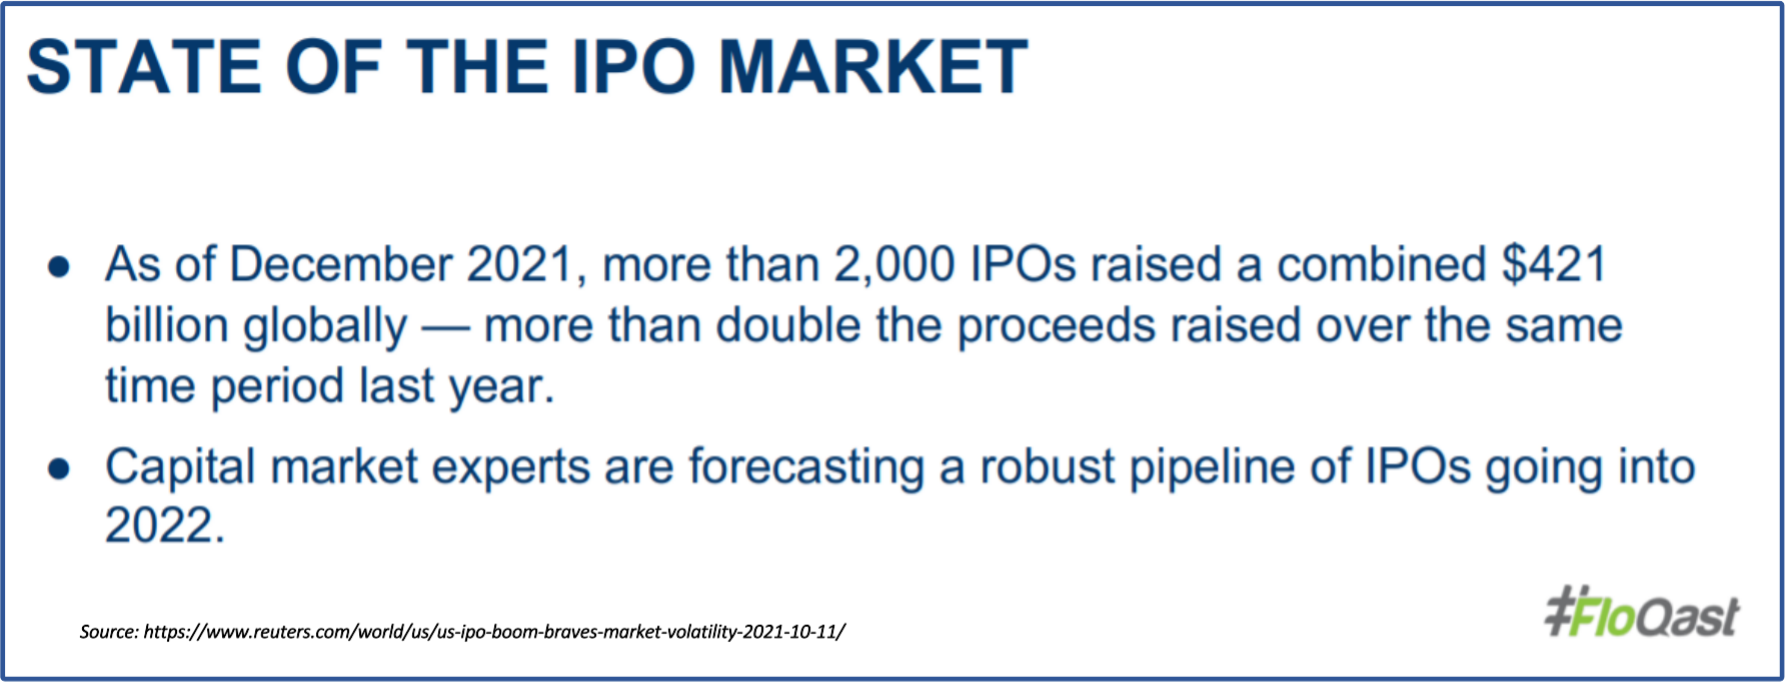 state of ipo market